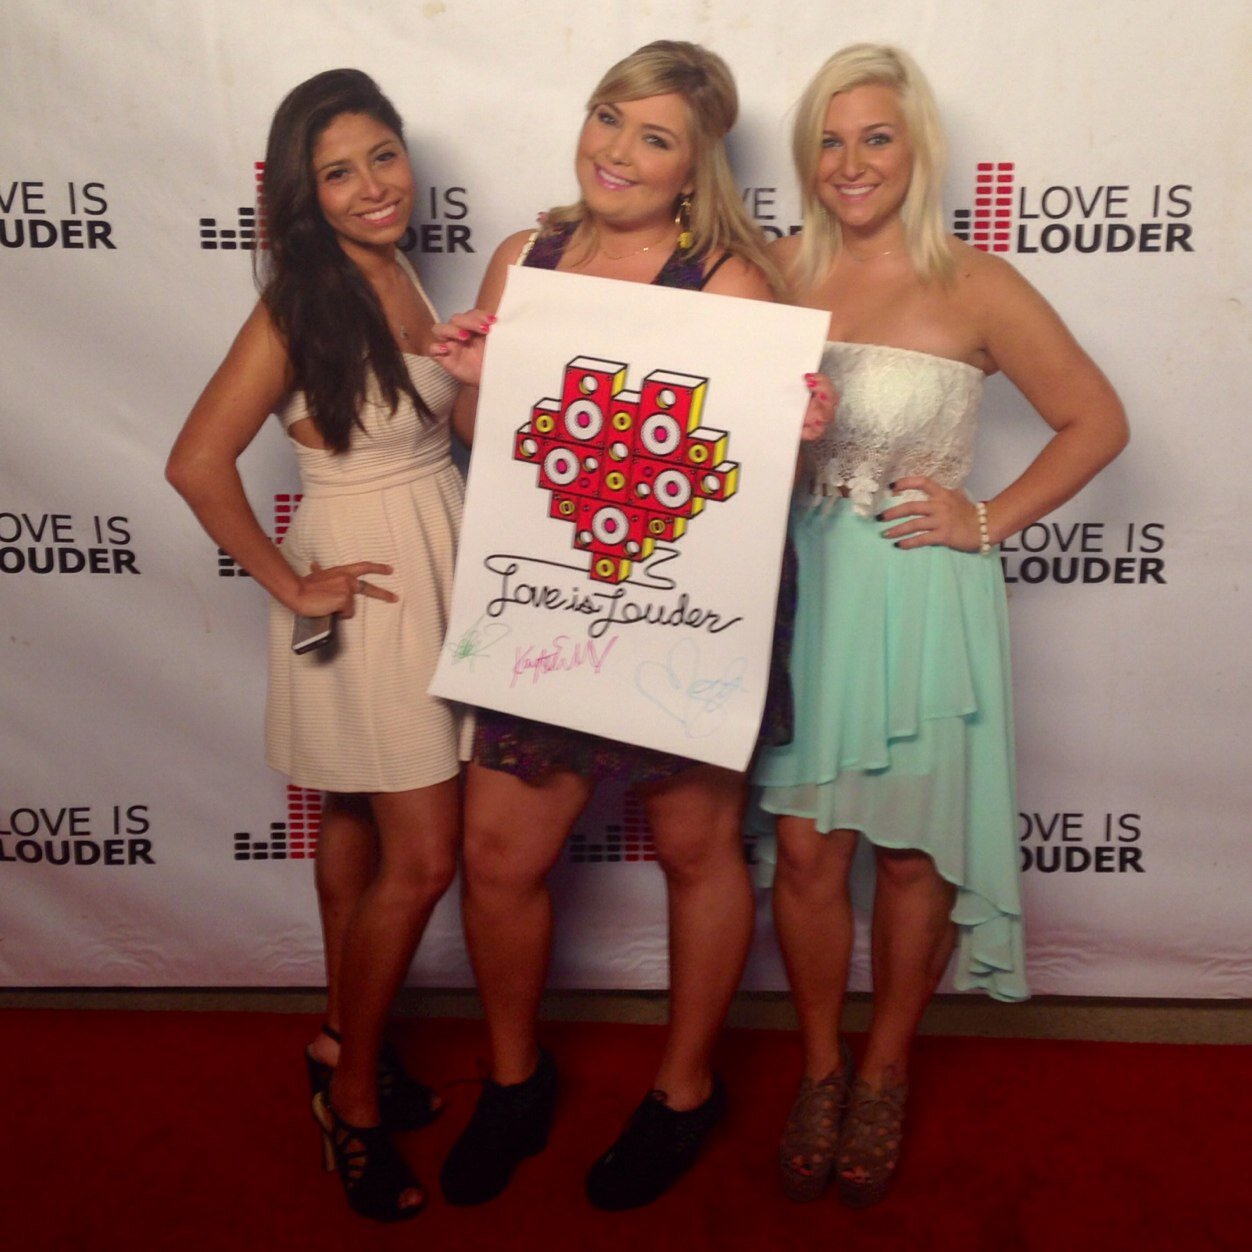 Ivy Briones, Sarah Everhart and Kaytee Everhart at Chaz Dean's Summer Party sponsoring Love is Louder (2013)